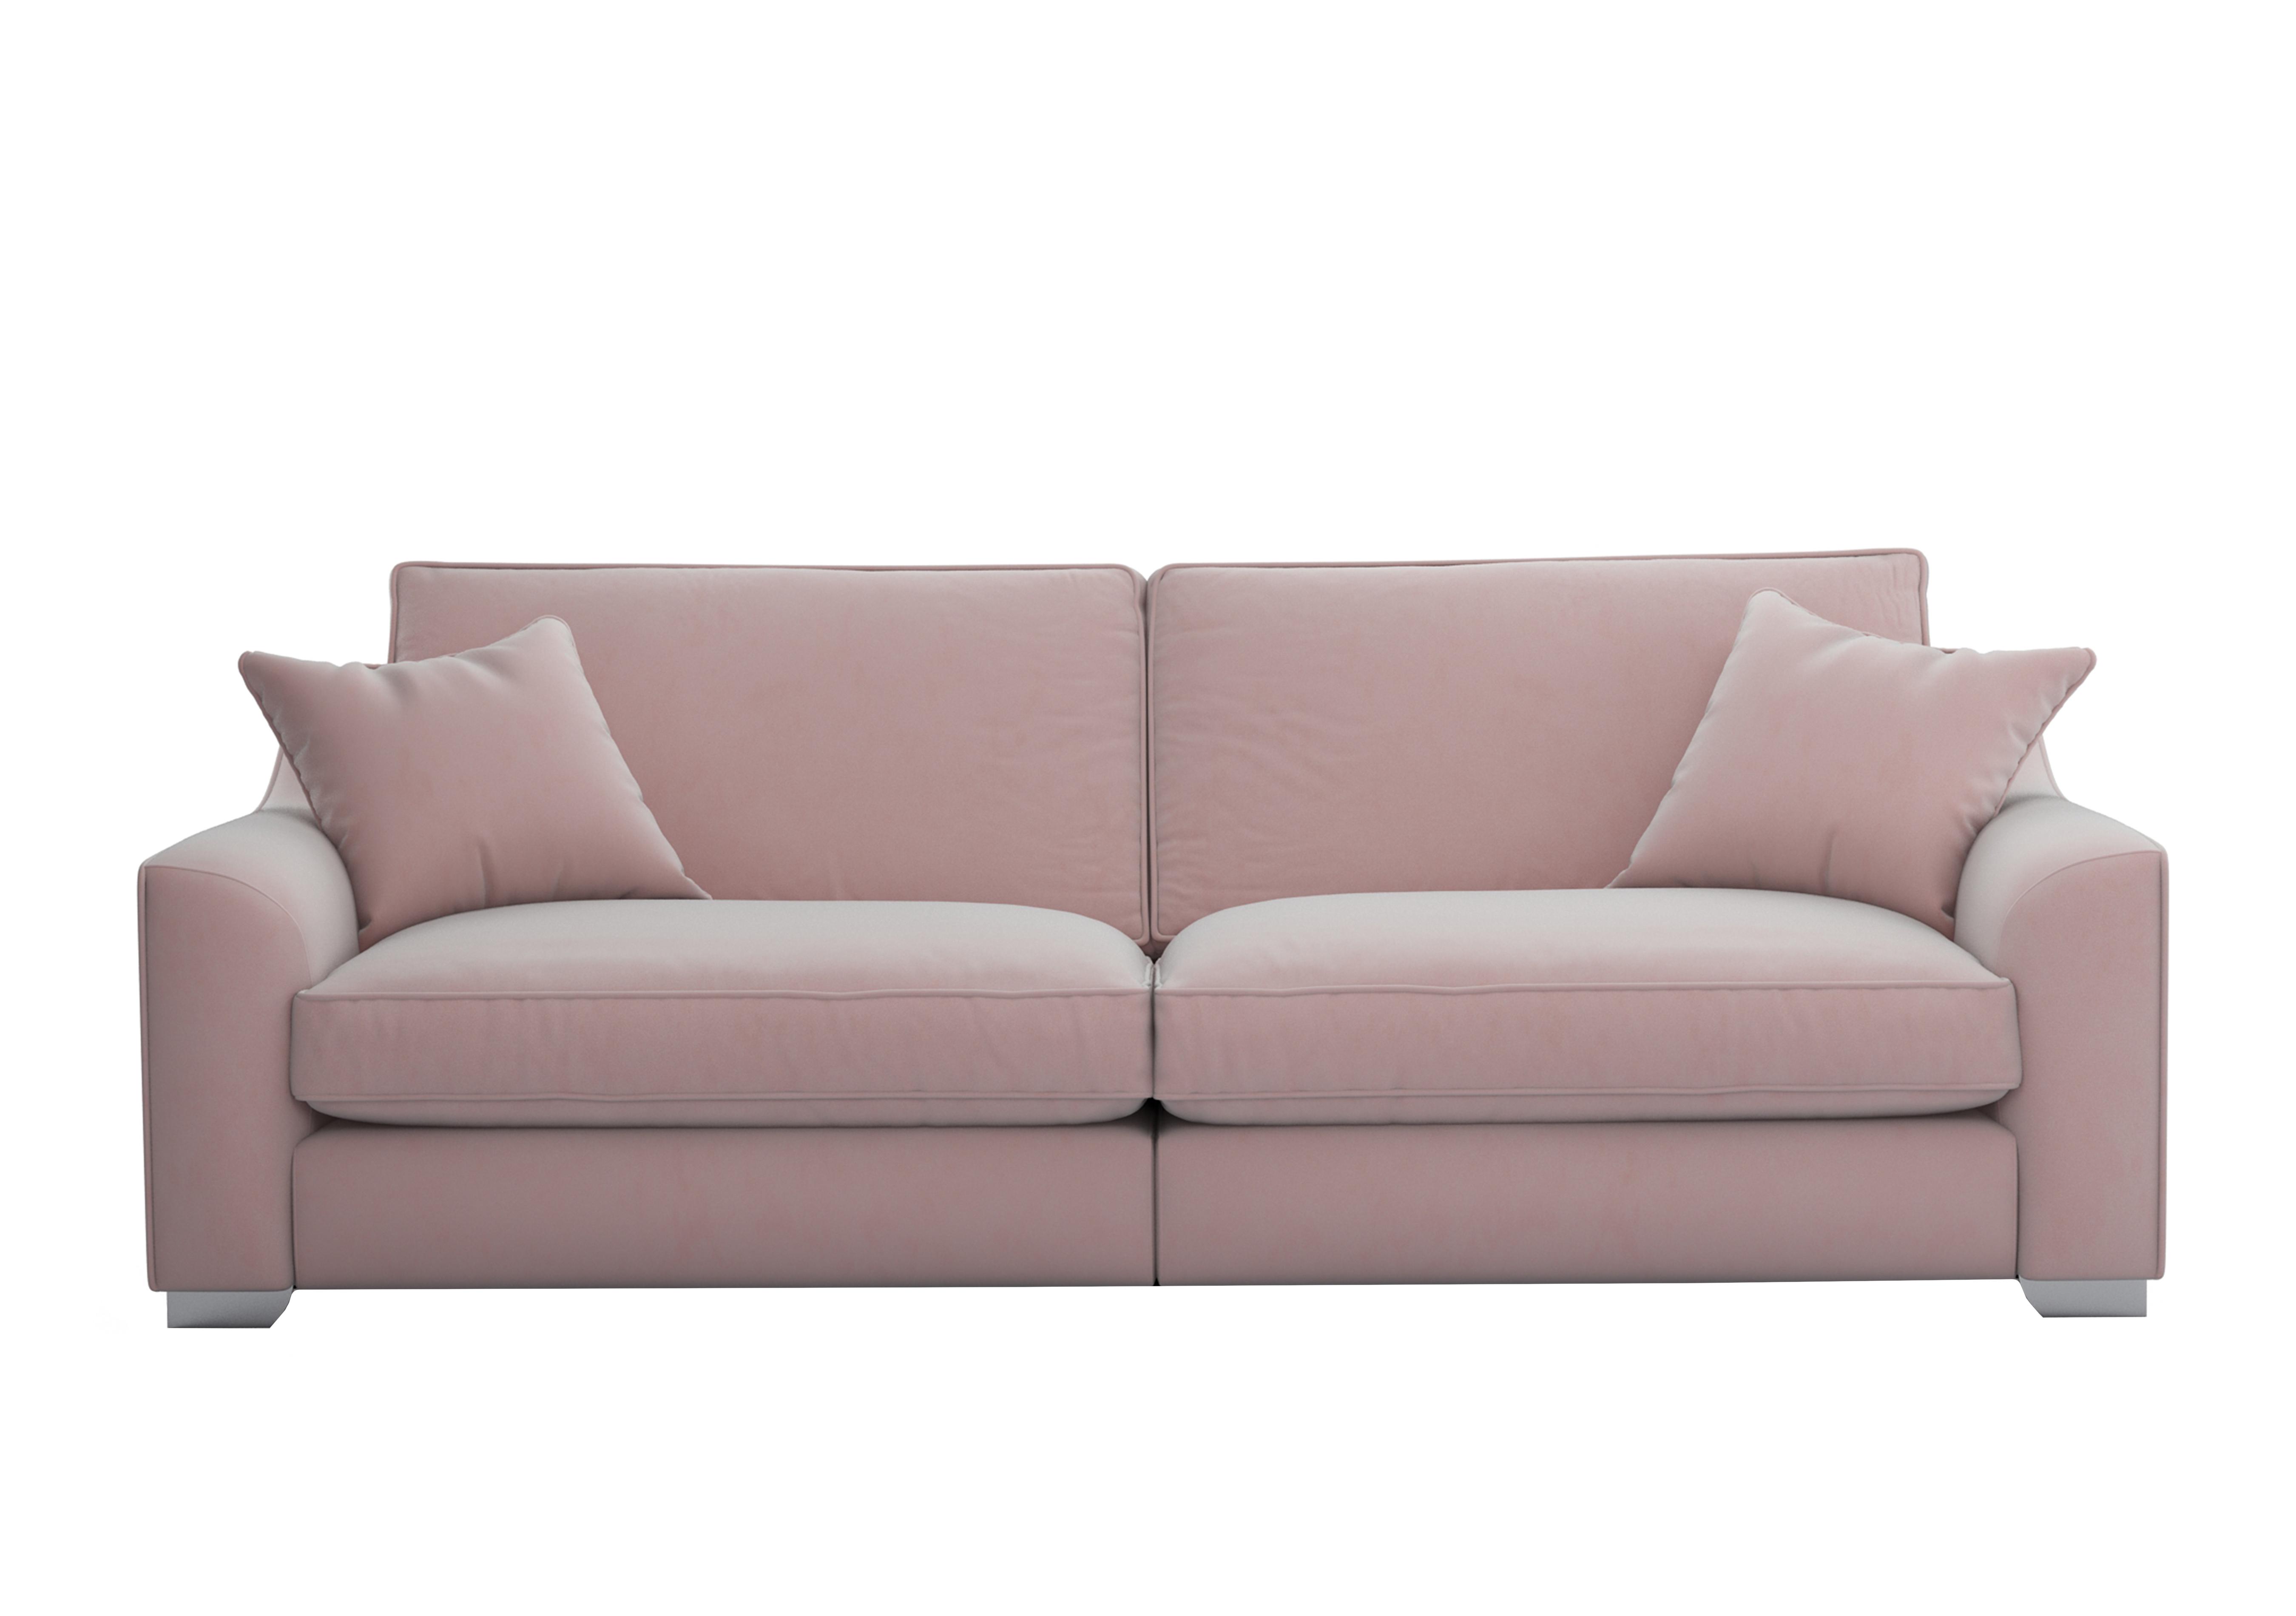 Isobel 4 Seater Fabric Sofa in Cot256 Cotton Candy Ch Ft on Furniture Village